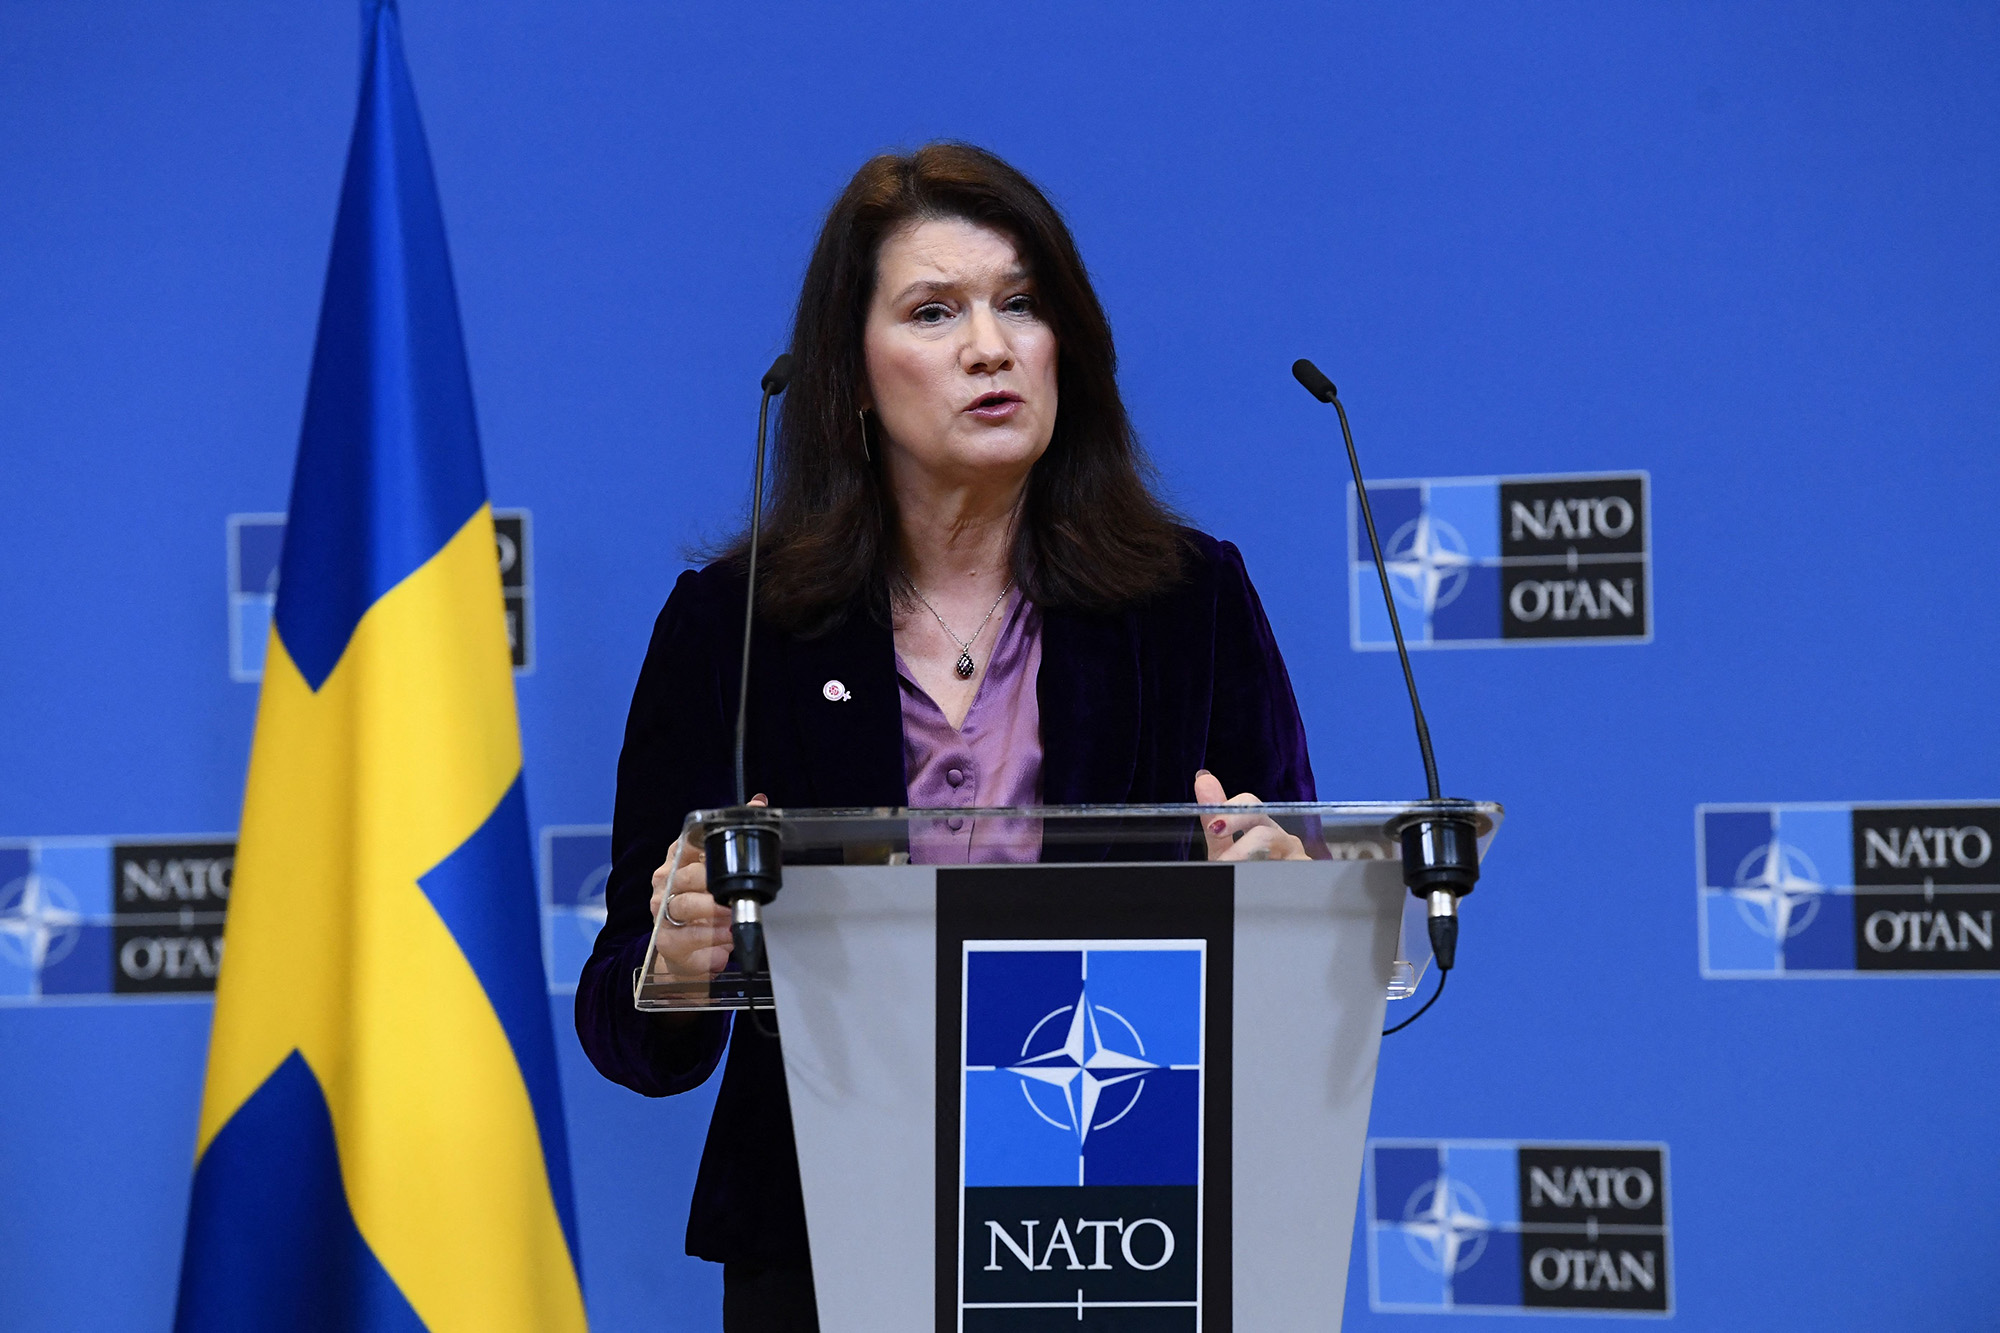 Sweden Foreign minister Ann Linde talks during a press conference at the Nato headquarters in Brussels, Belgium, on January 24.